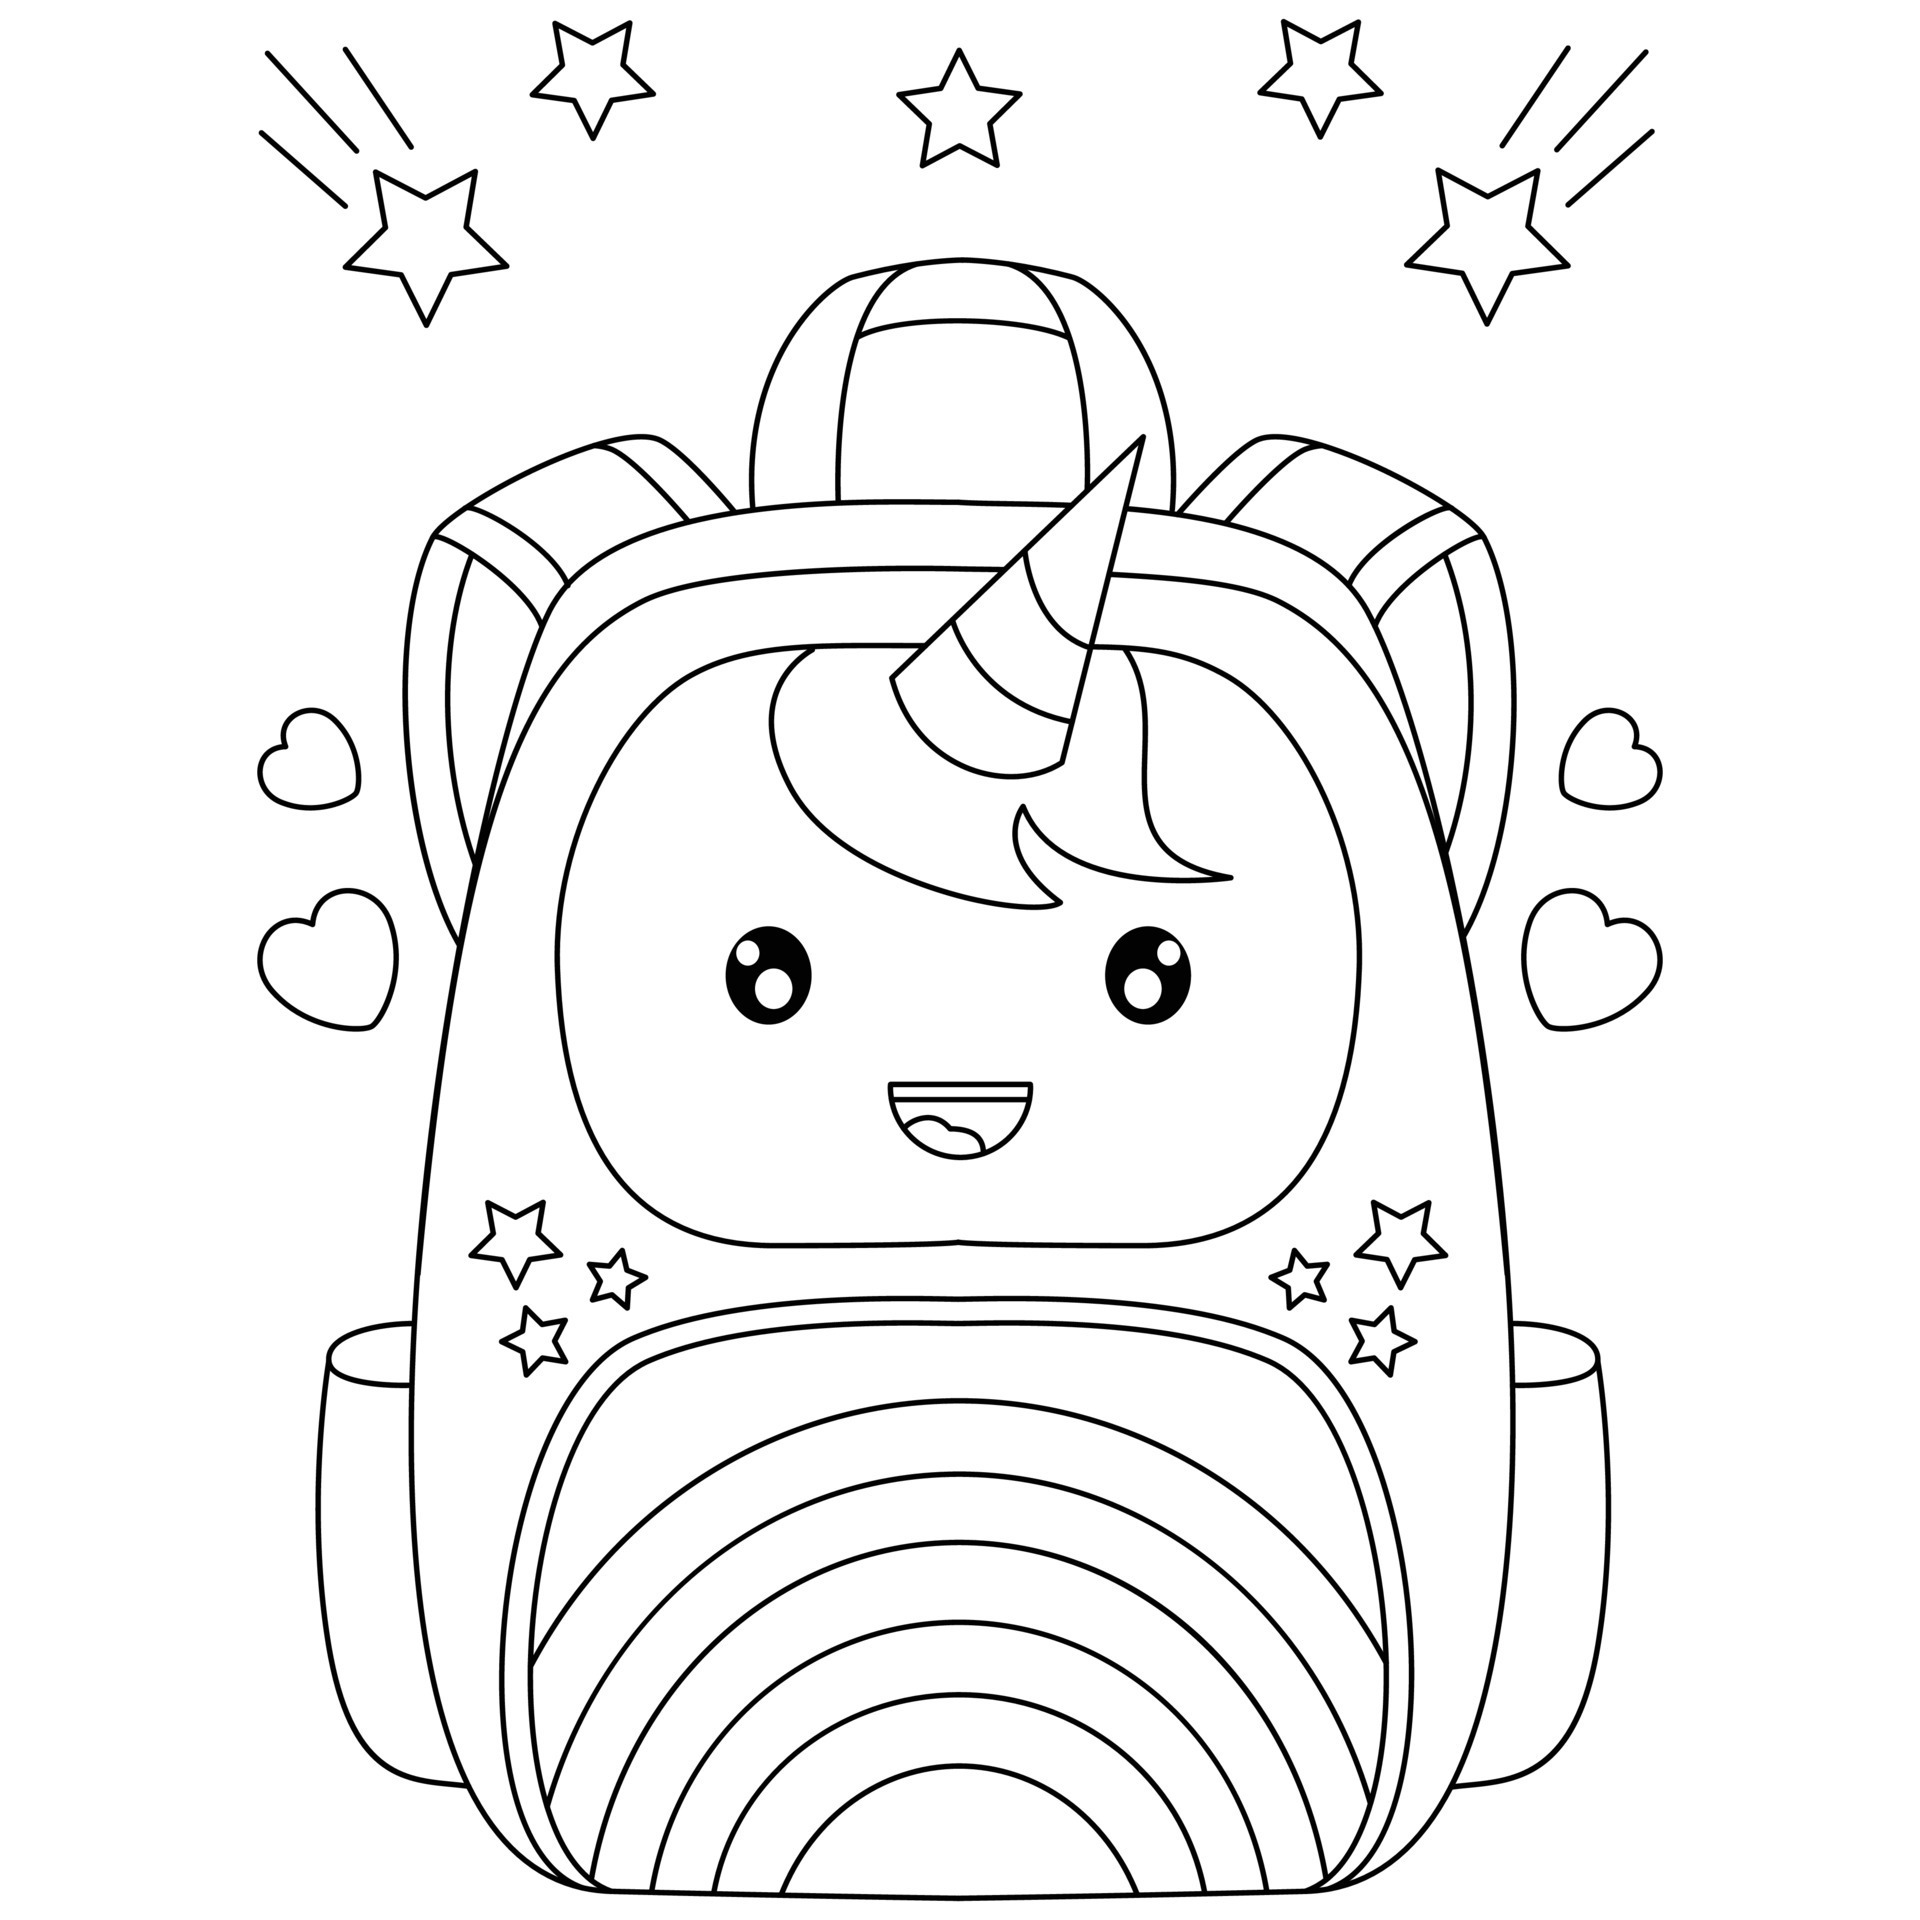 Medicine Bag Colouring Page - Kids Puzzles and Games